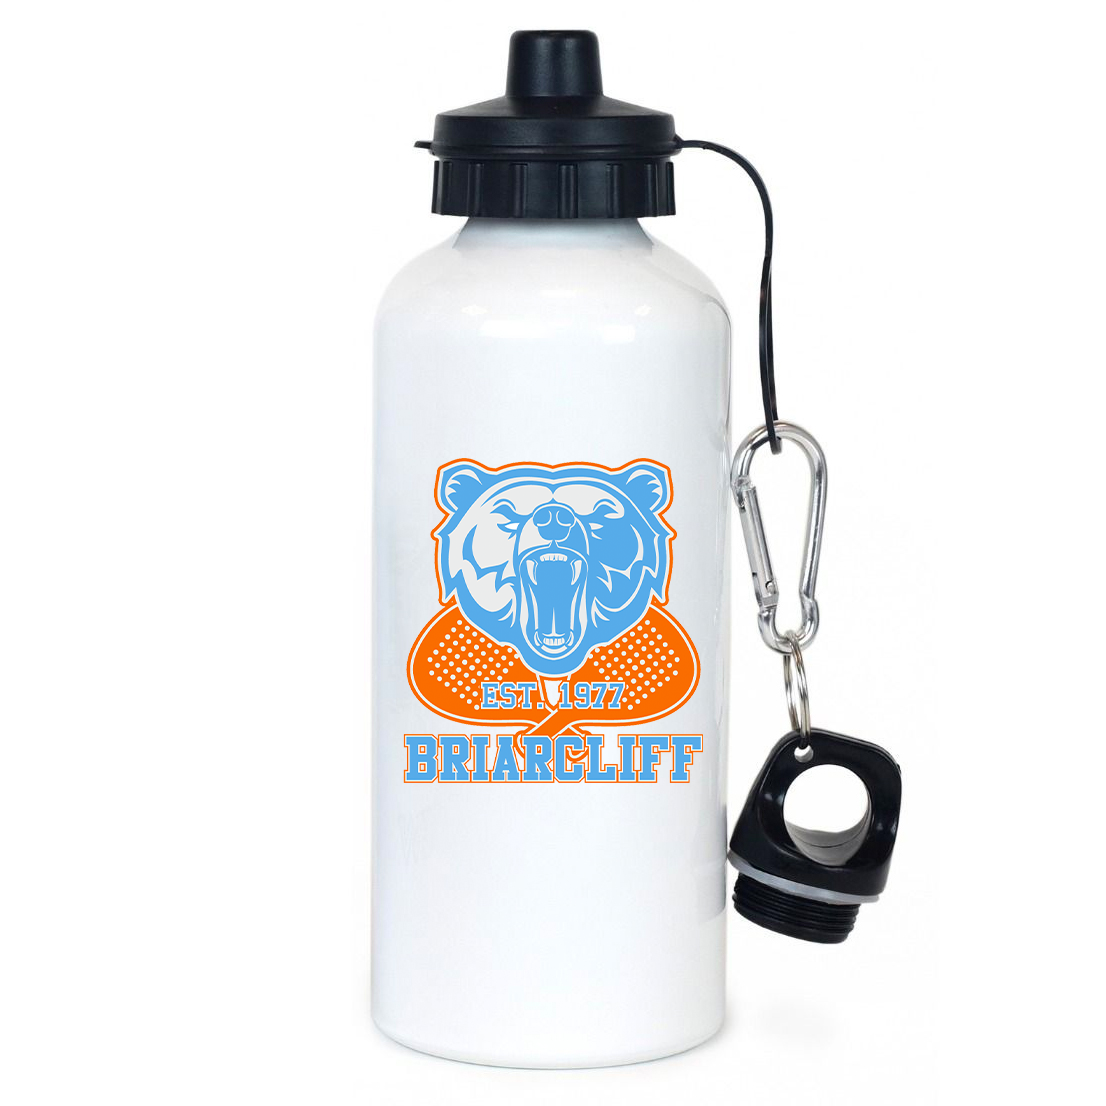 Briarcliff Paddle Team Water Bottle